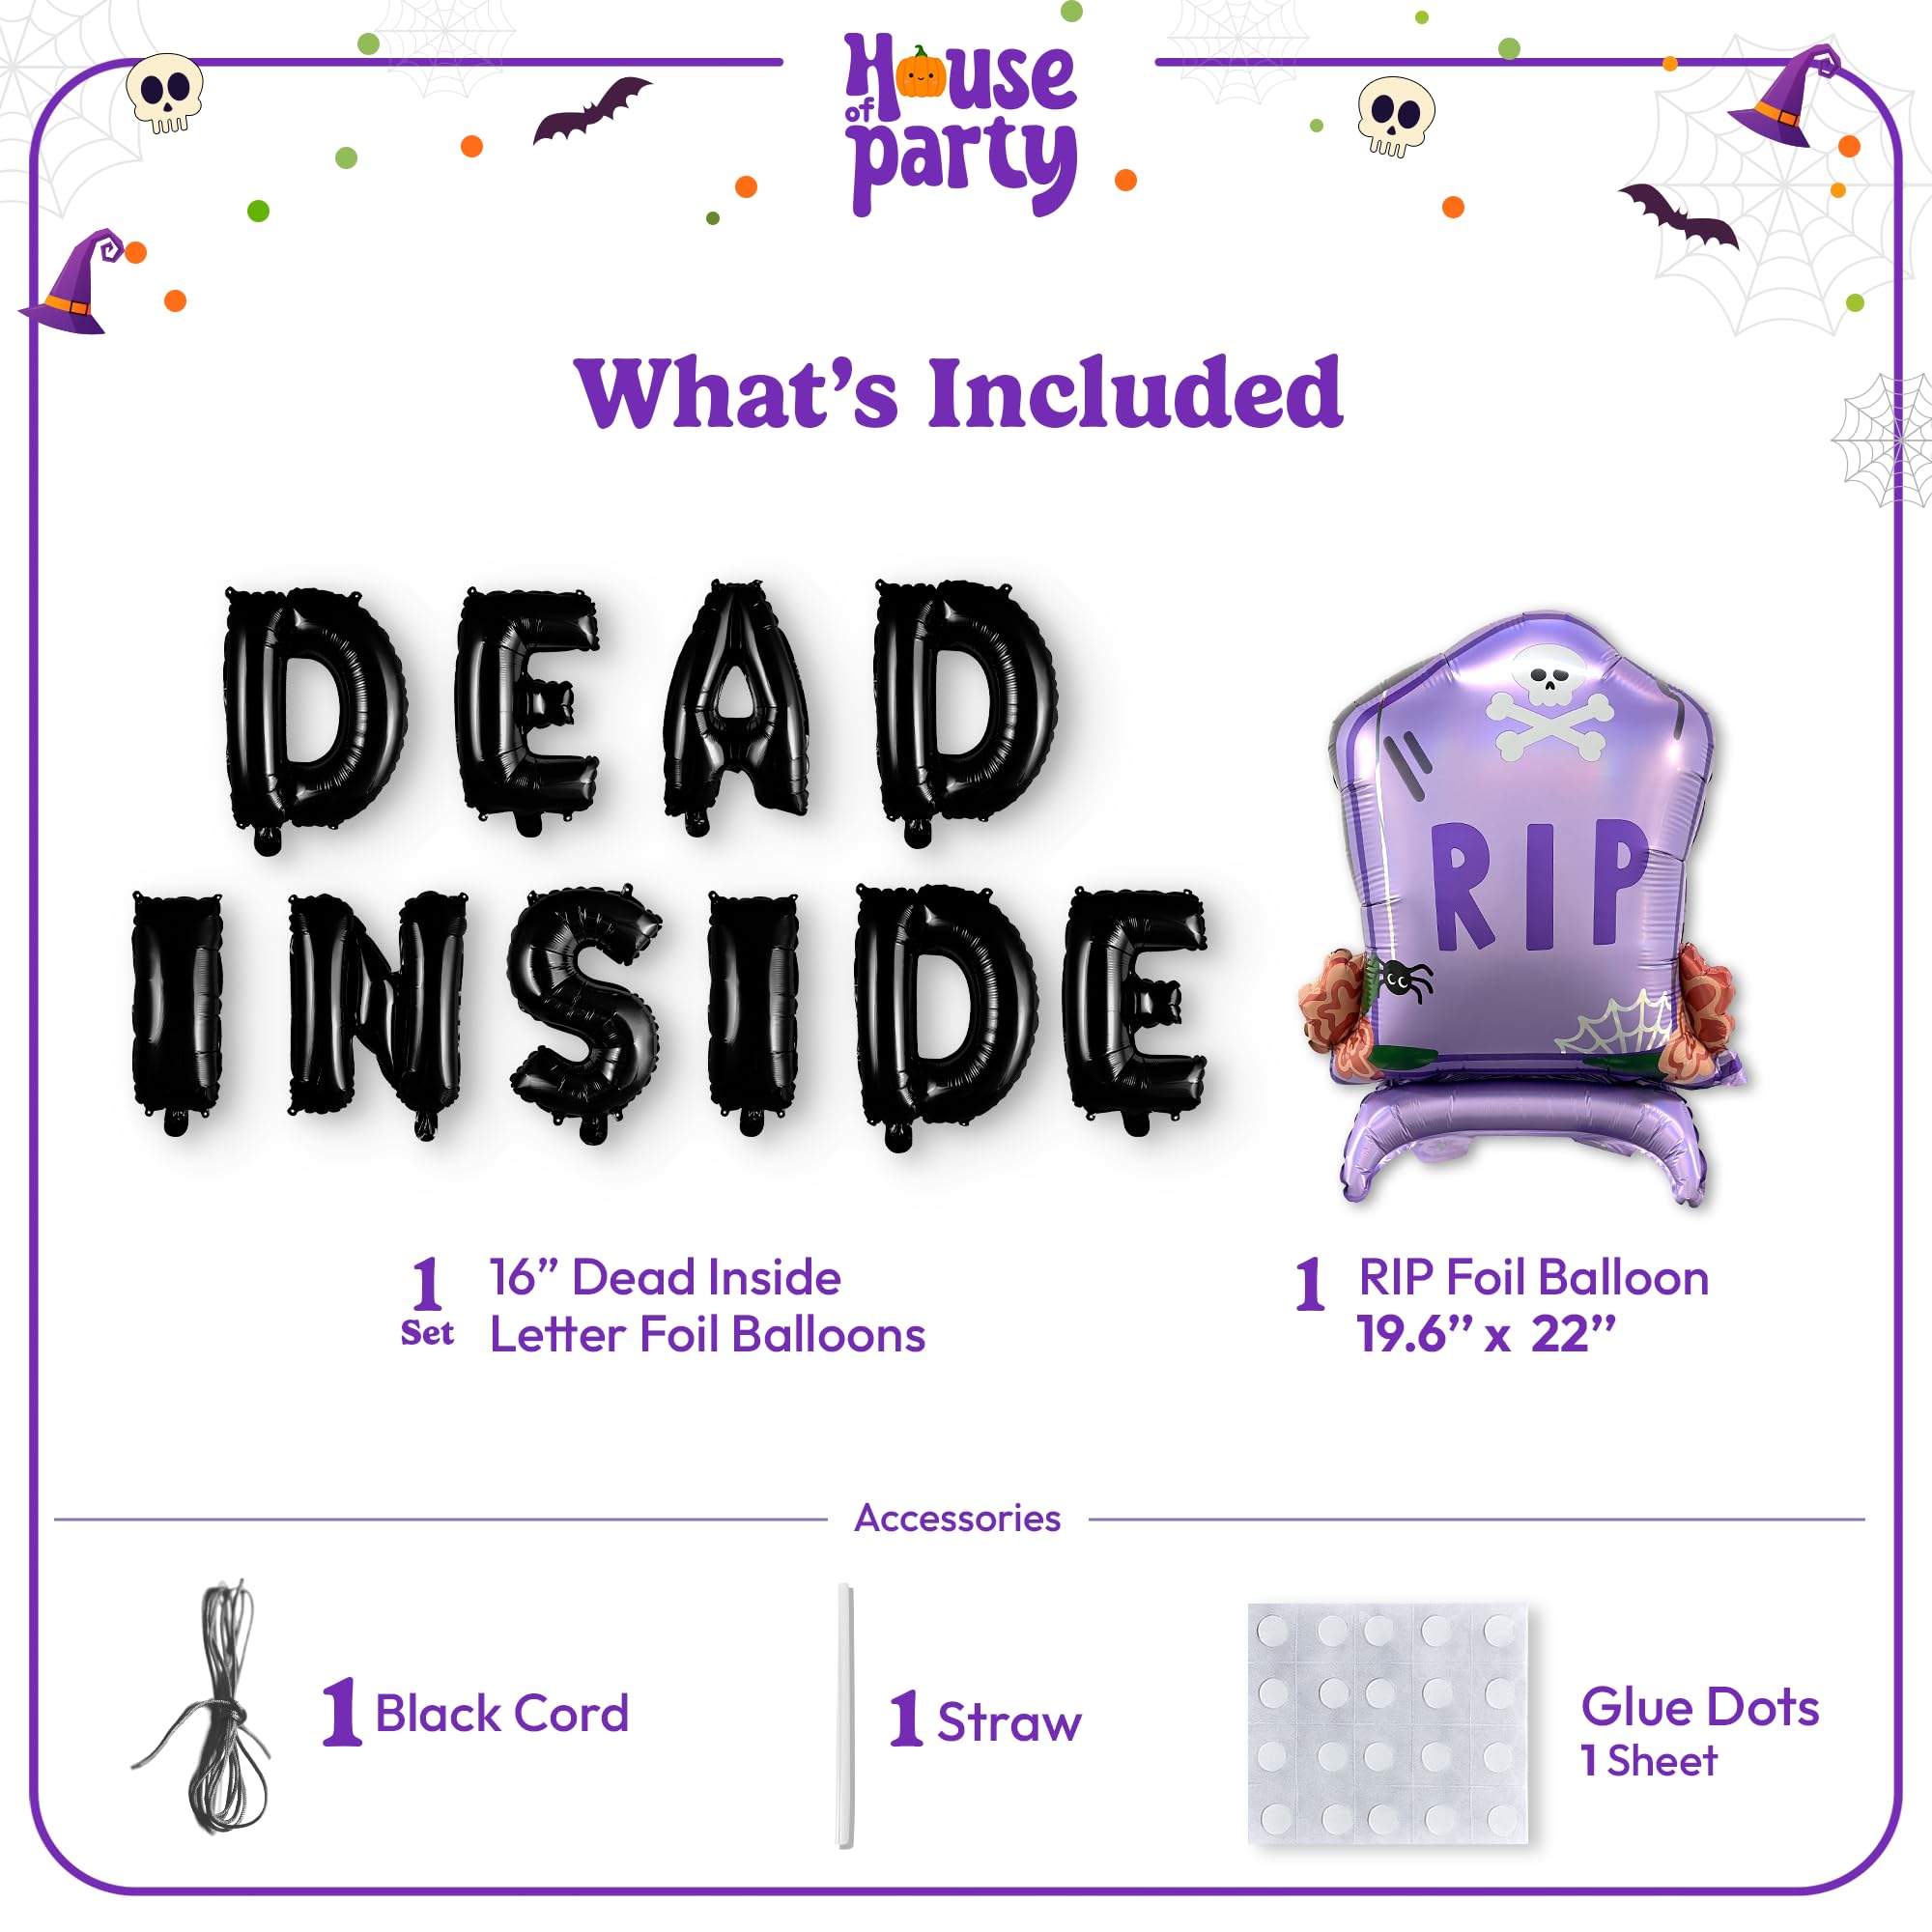 HOUSE OF PARTY, Extra large 22 * 19.6 inch Halloween Party Balloons Kit, 2 Sets of ‘DEAD INSIDE' Letter Balloons + Gravestone foil balloon for Halloween Birthday Party Decorations Supplies